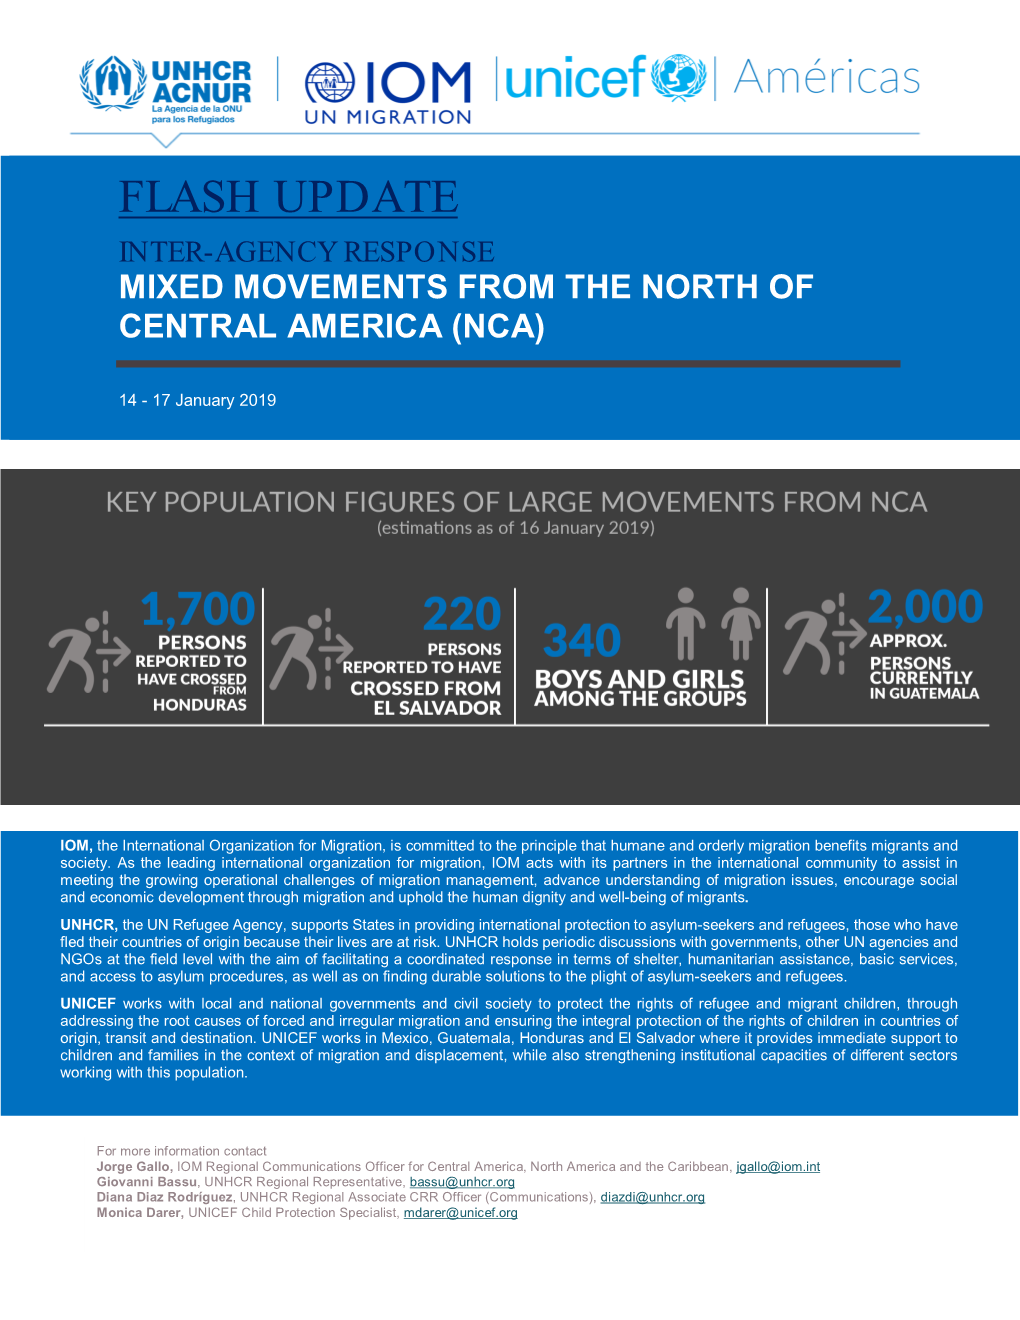 Flash Update Inter-Agency Response Mixed Movements from the North of Central America (Nca)